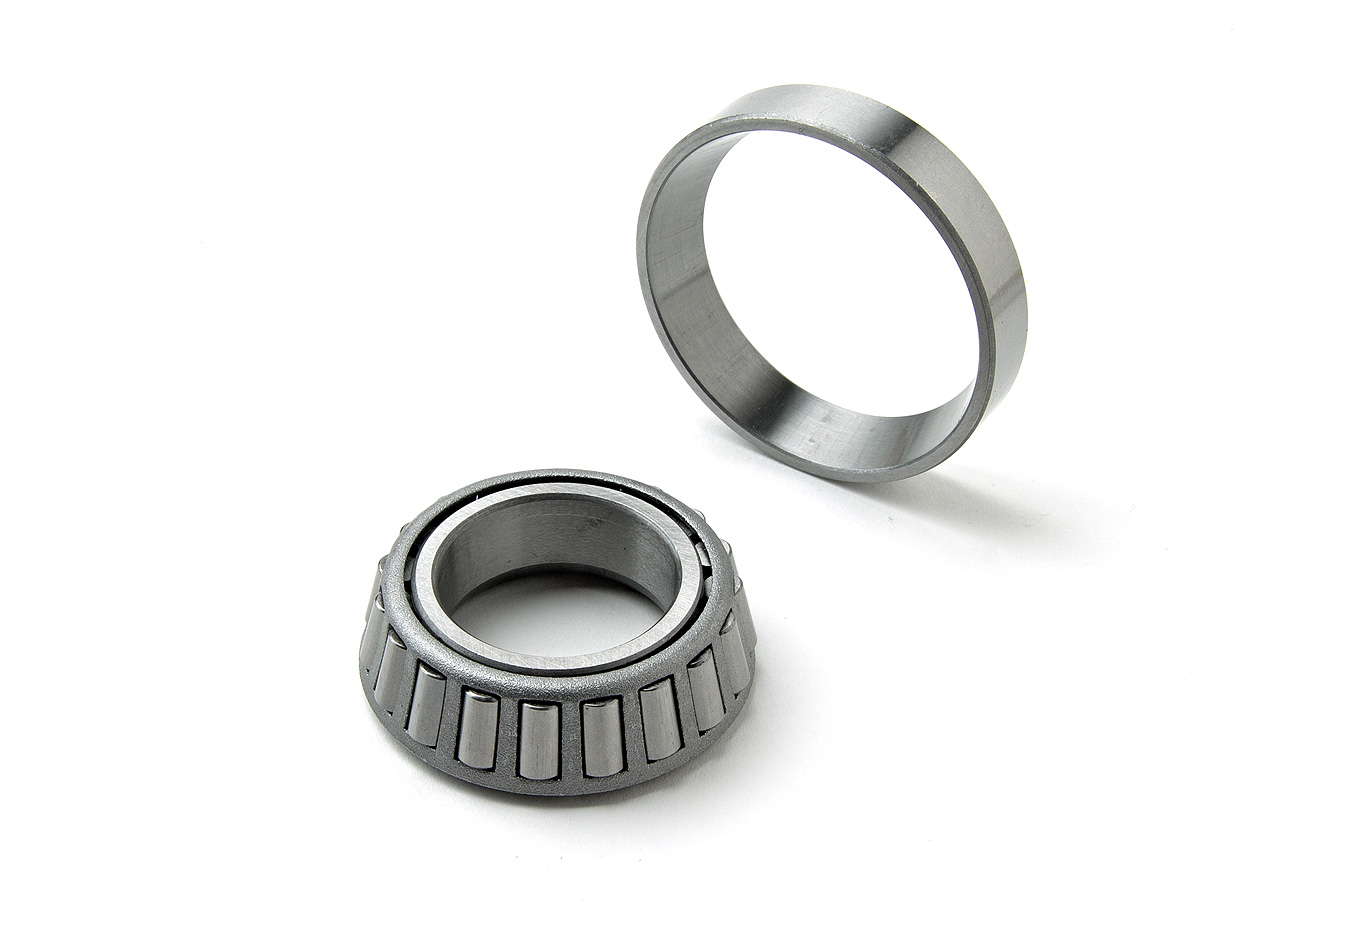 Kegelrollenlager
Tapered roller bearing
Butée à rouleaux con